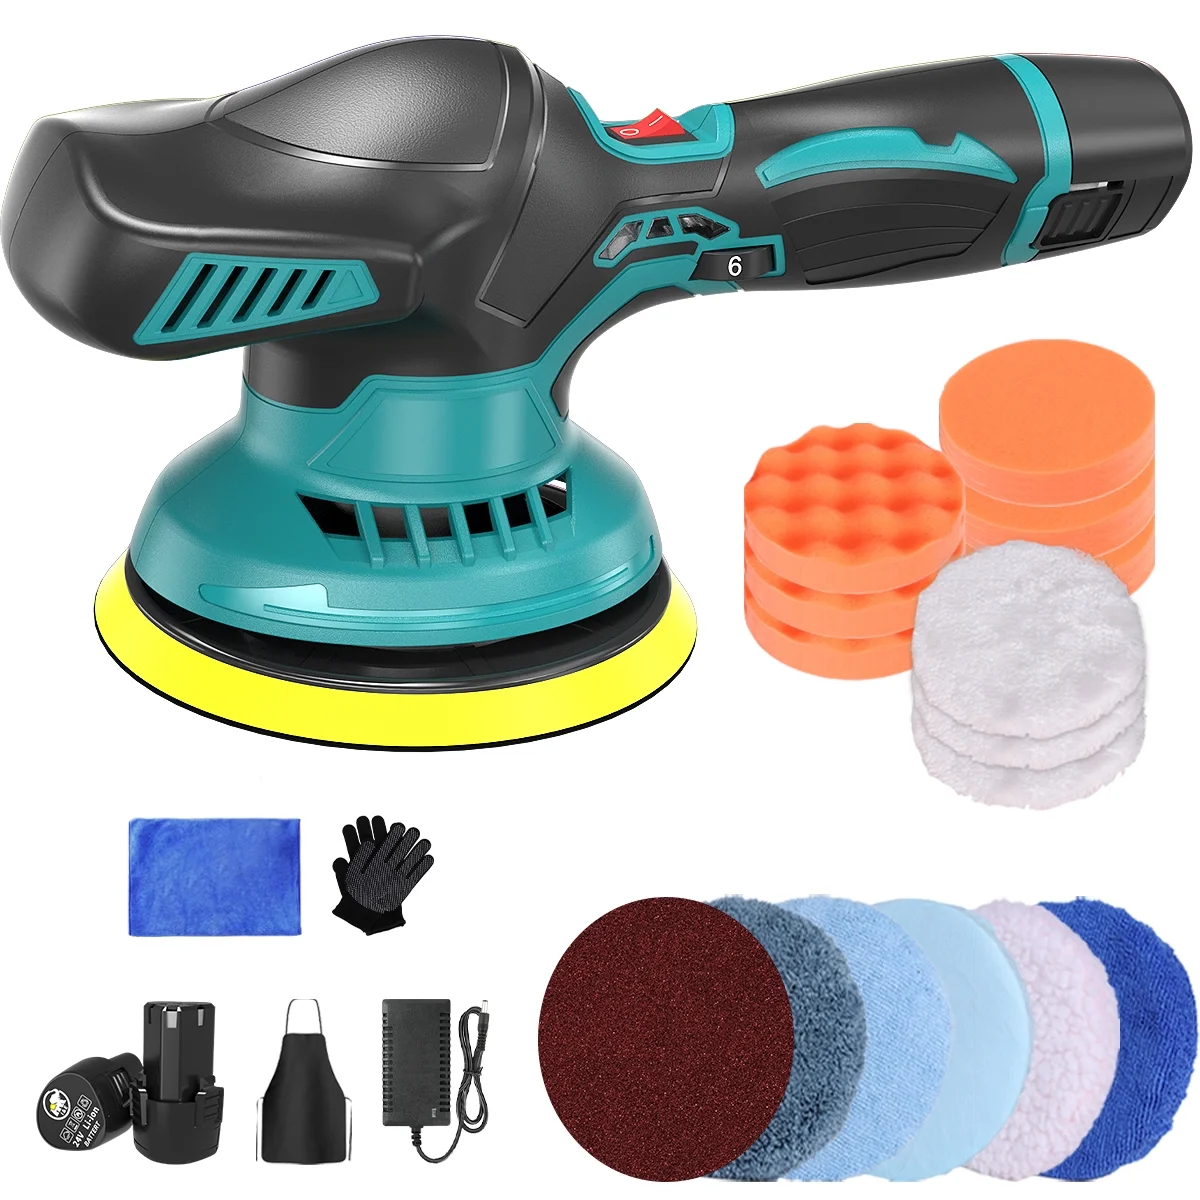 6 Inch Cordless Car Buffers Polishers Kit with 2pcs 2000mAh Lithium Rechargeable Battery, Portable Rotary Car Polisher Set with 6 Variable Speed 2500-5000 RPM for Car, Boat Sanding, Polishing, Waxing